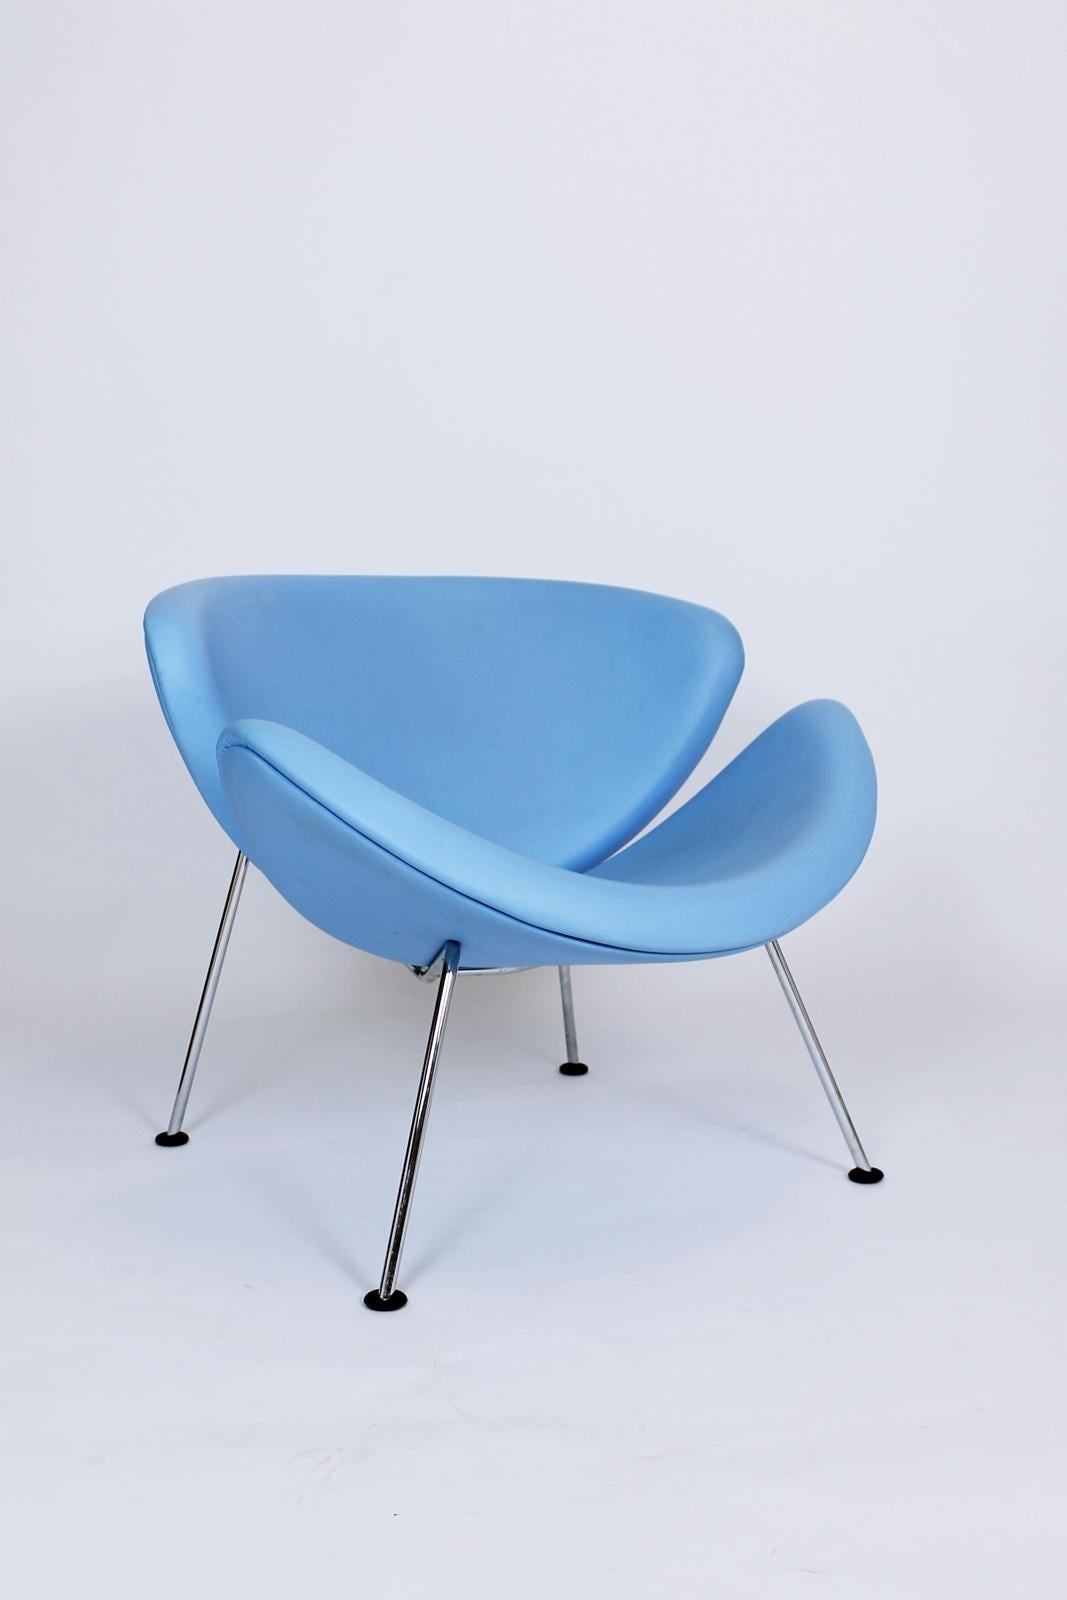 light blue leather chair